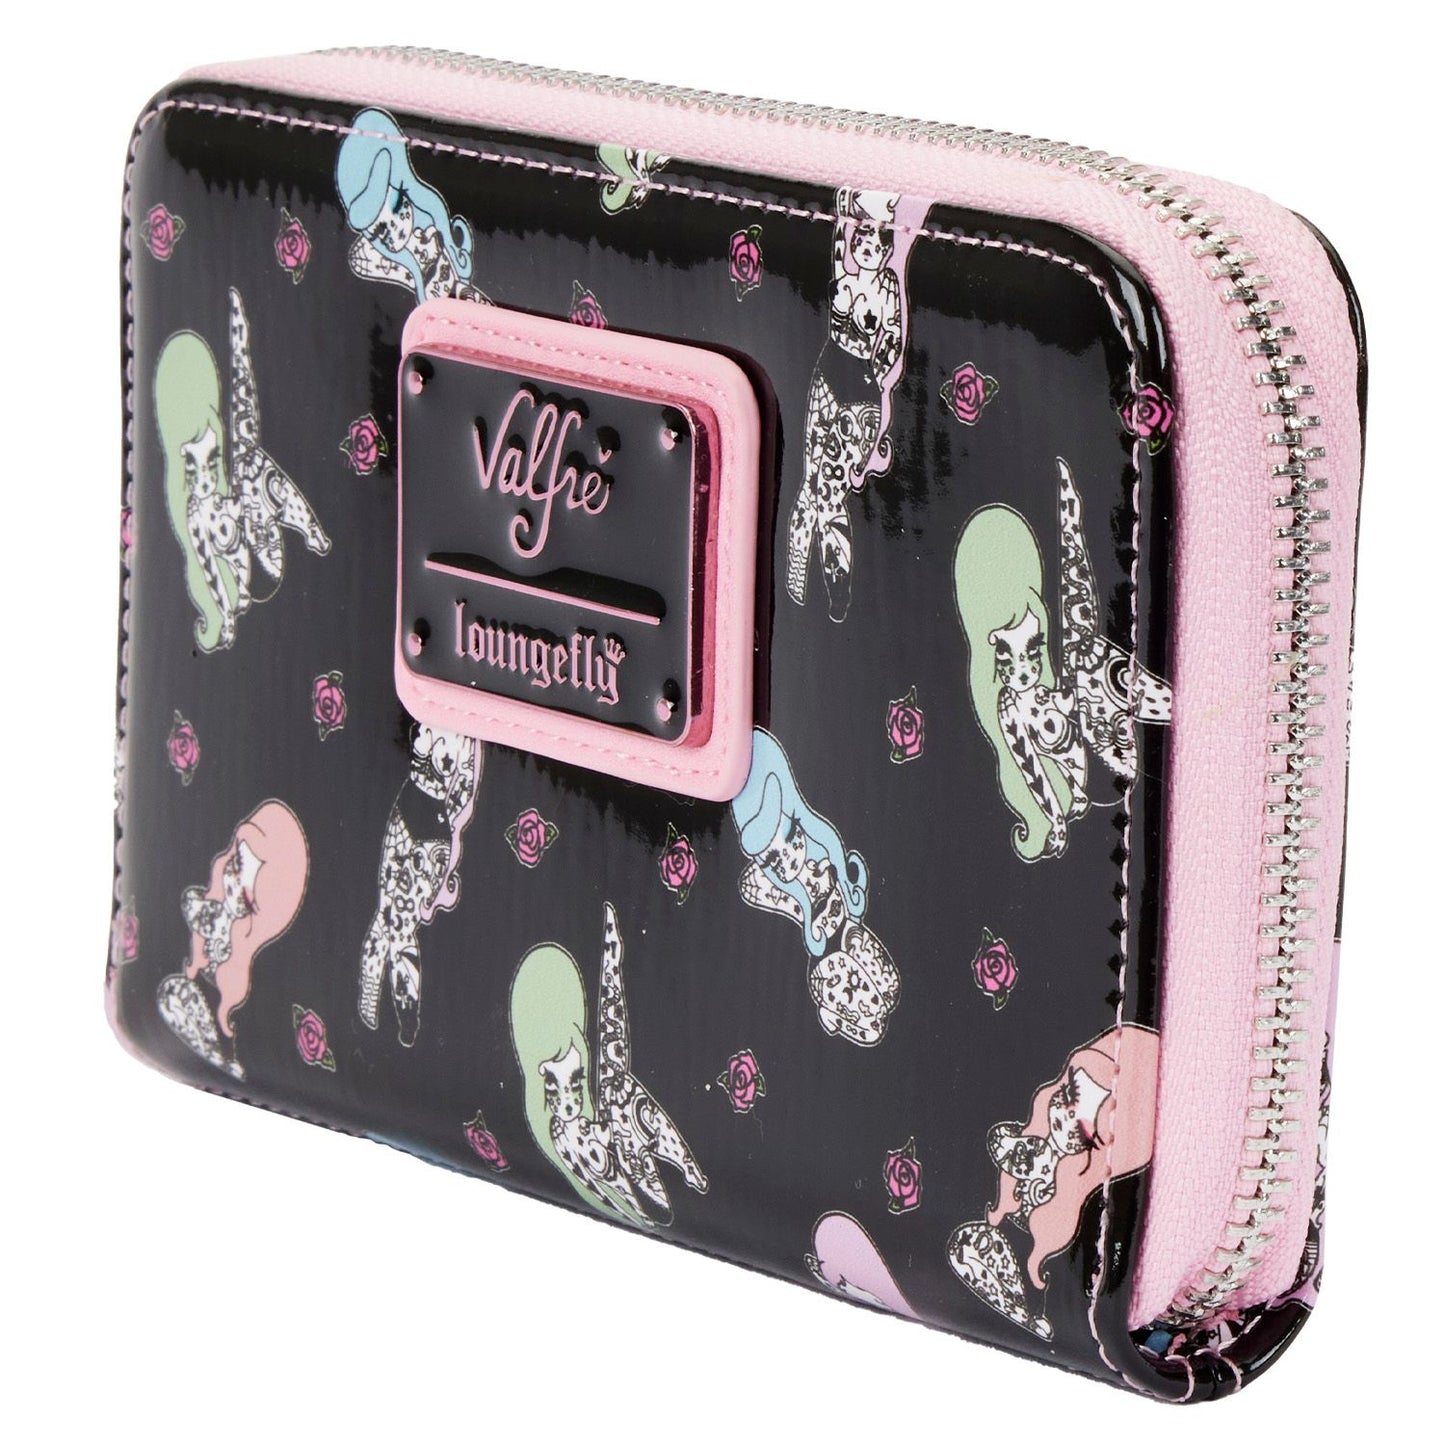 LOUNGEFLY VALFRE WALLET. Check out all our Loungefly collection online or at our Las Vegas location.